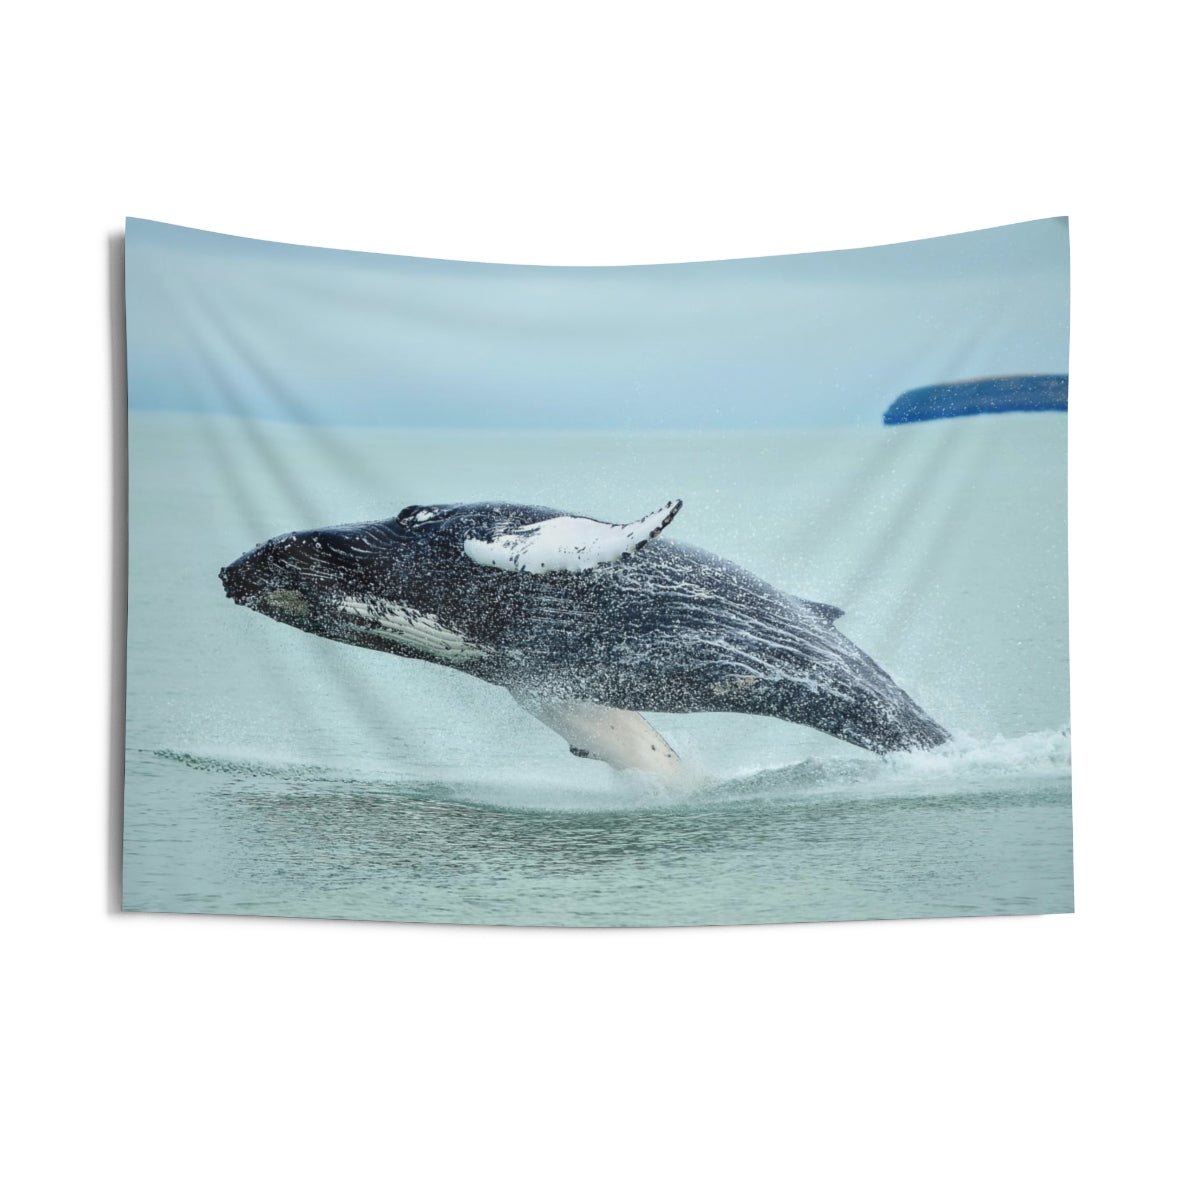 Humpback Whale Jump Tapestry, Ocean Sea Nautical Landscape Indoor Wall Art Hanging Tapestries Décor Home Dorm Gift Starcove Fashion